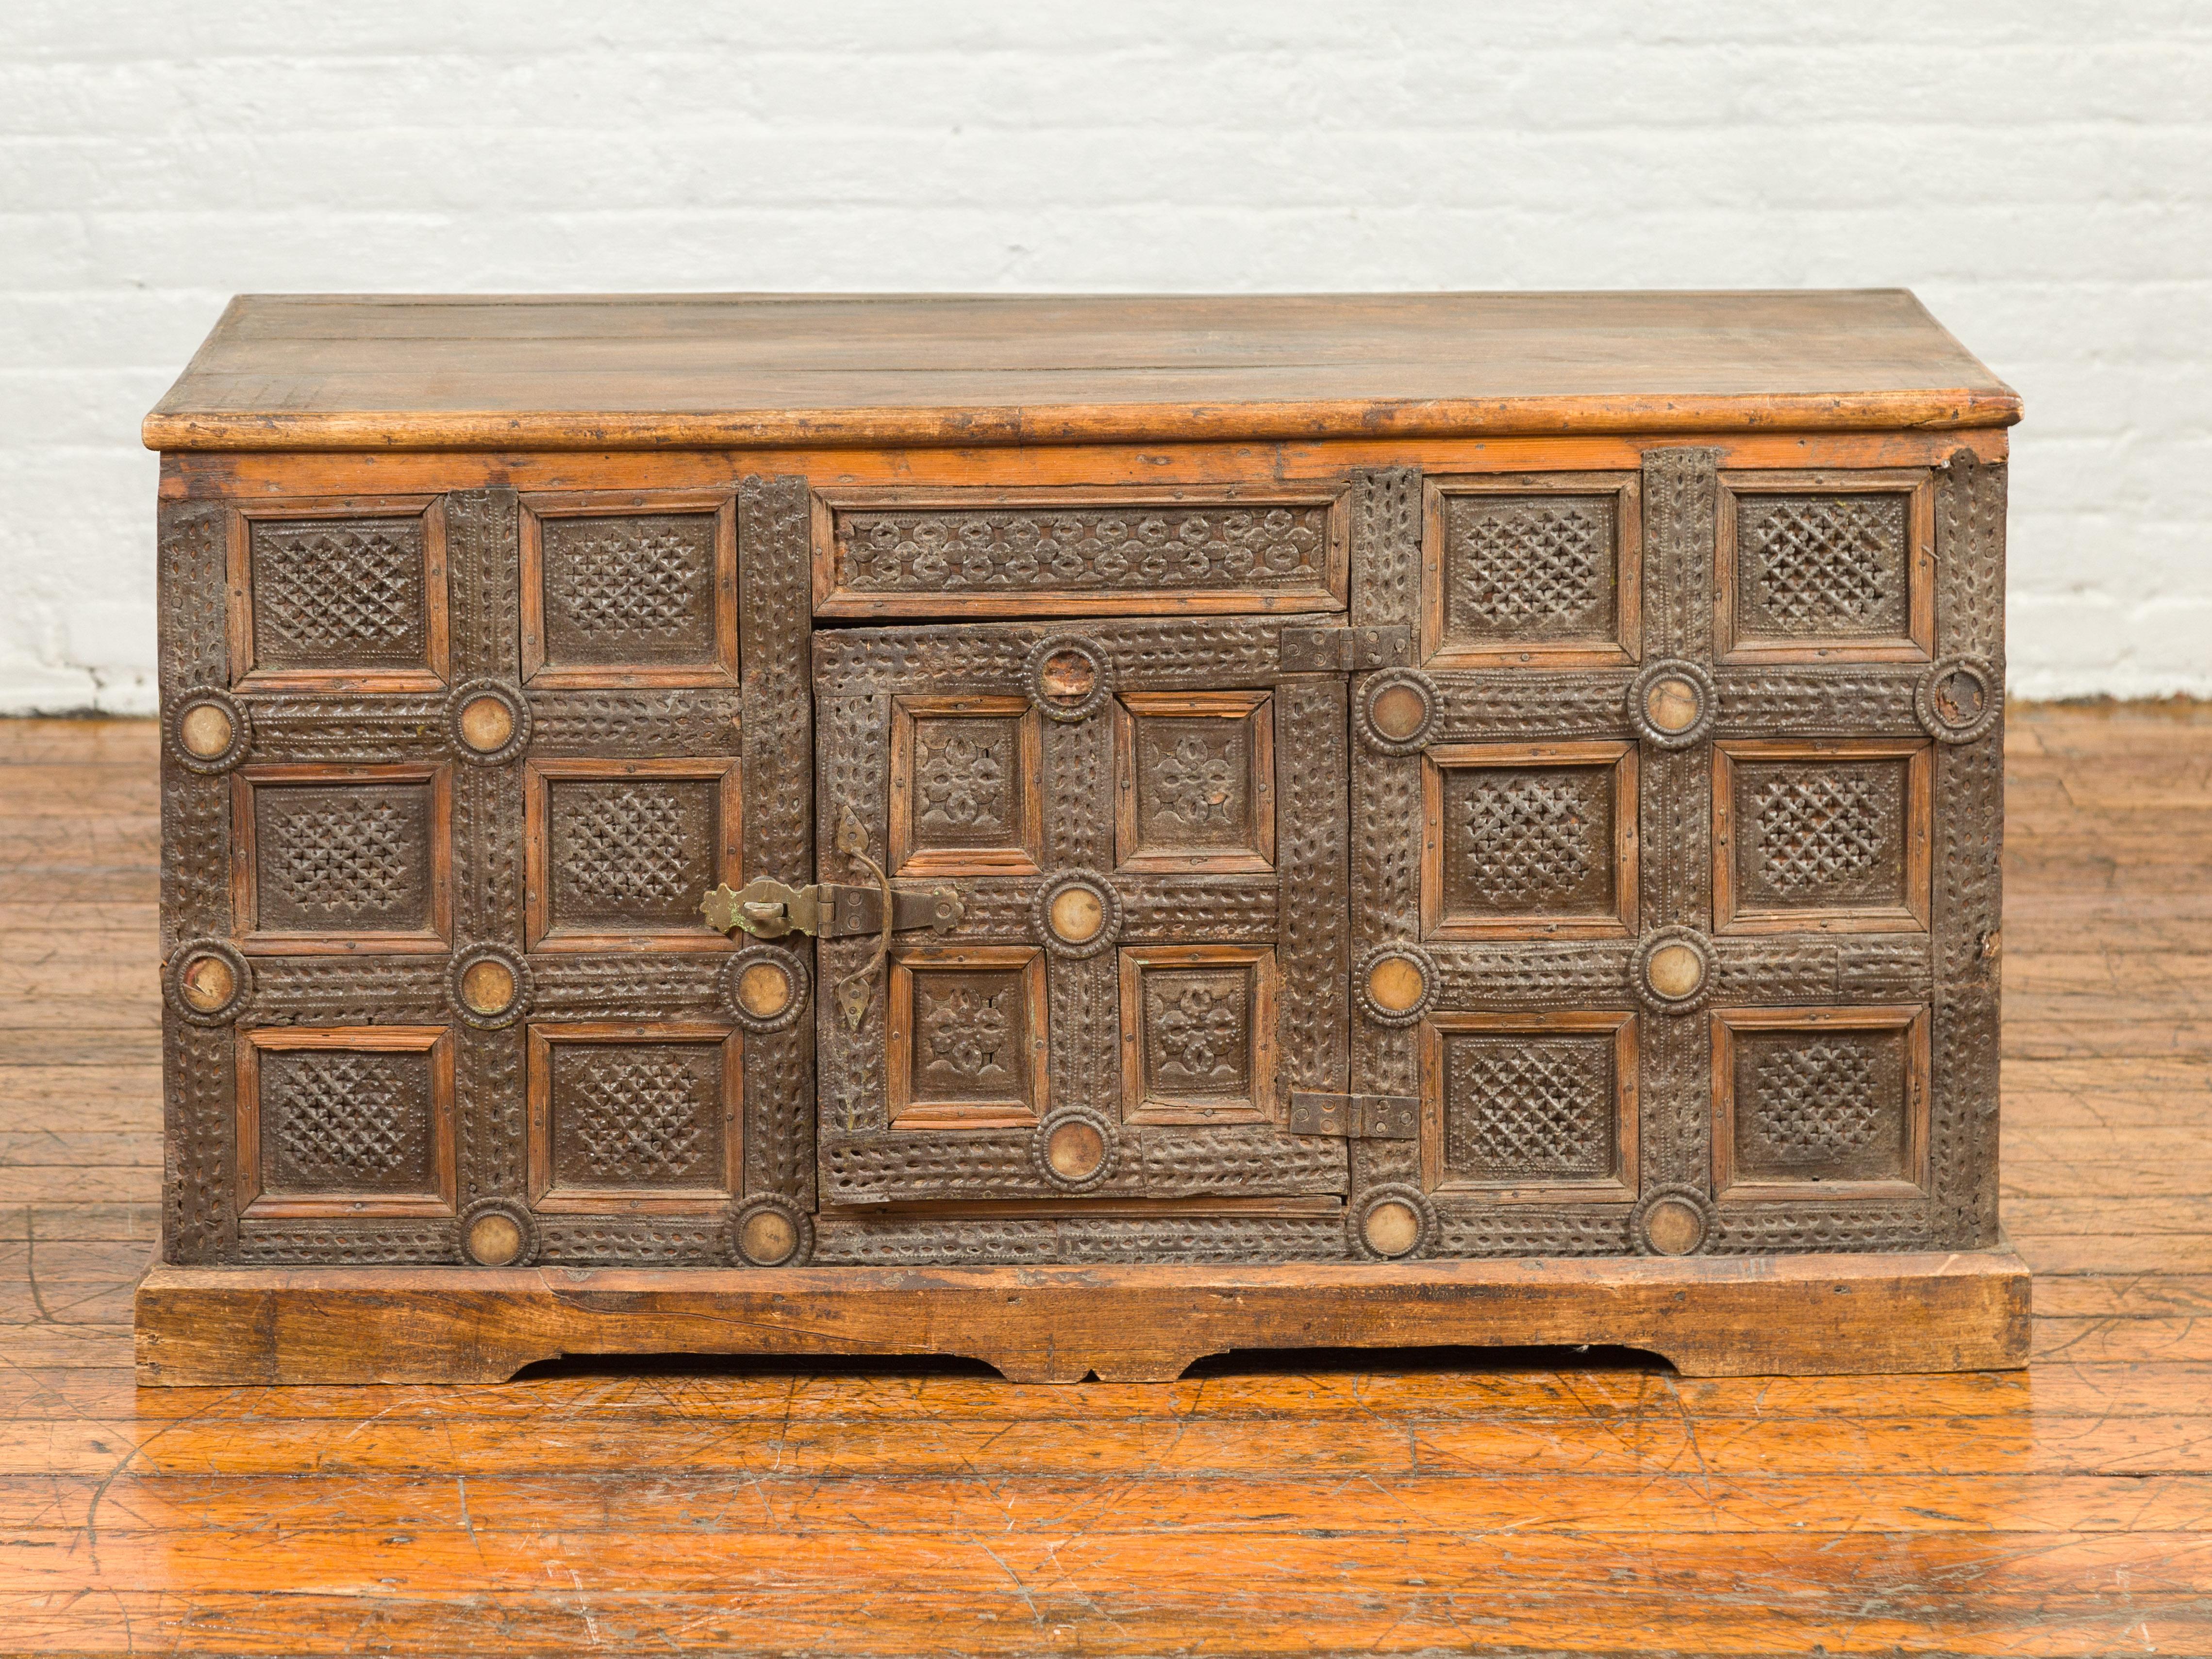 A vintage Indian wood and metal cabinet from the mid-20th century, with geometric decor. Born in India during the midcentury period, this cabinet attracts our attention with its richly decorated façade and weathered appearance. The cabinet is